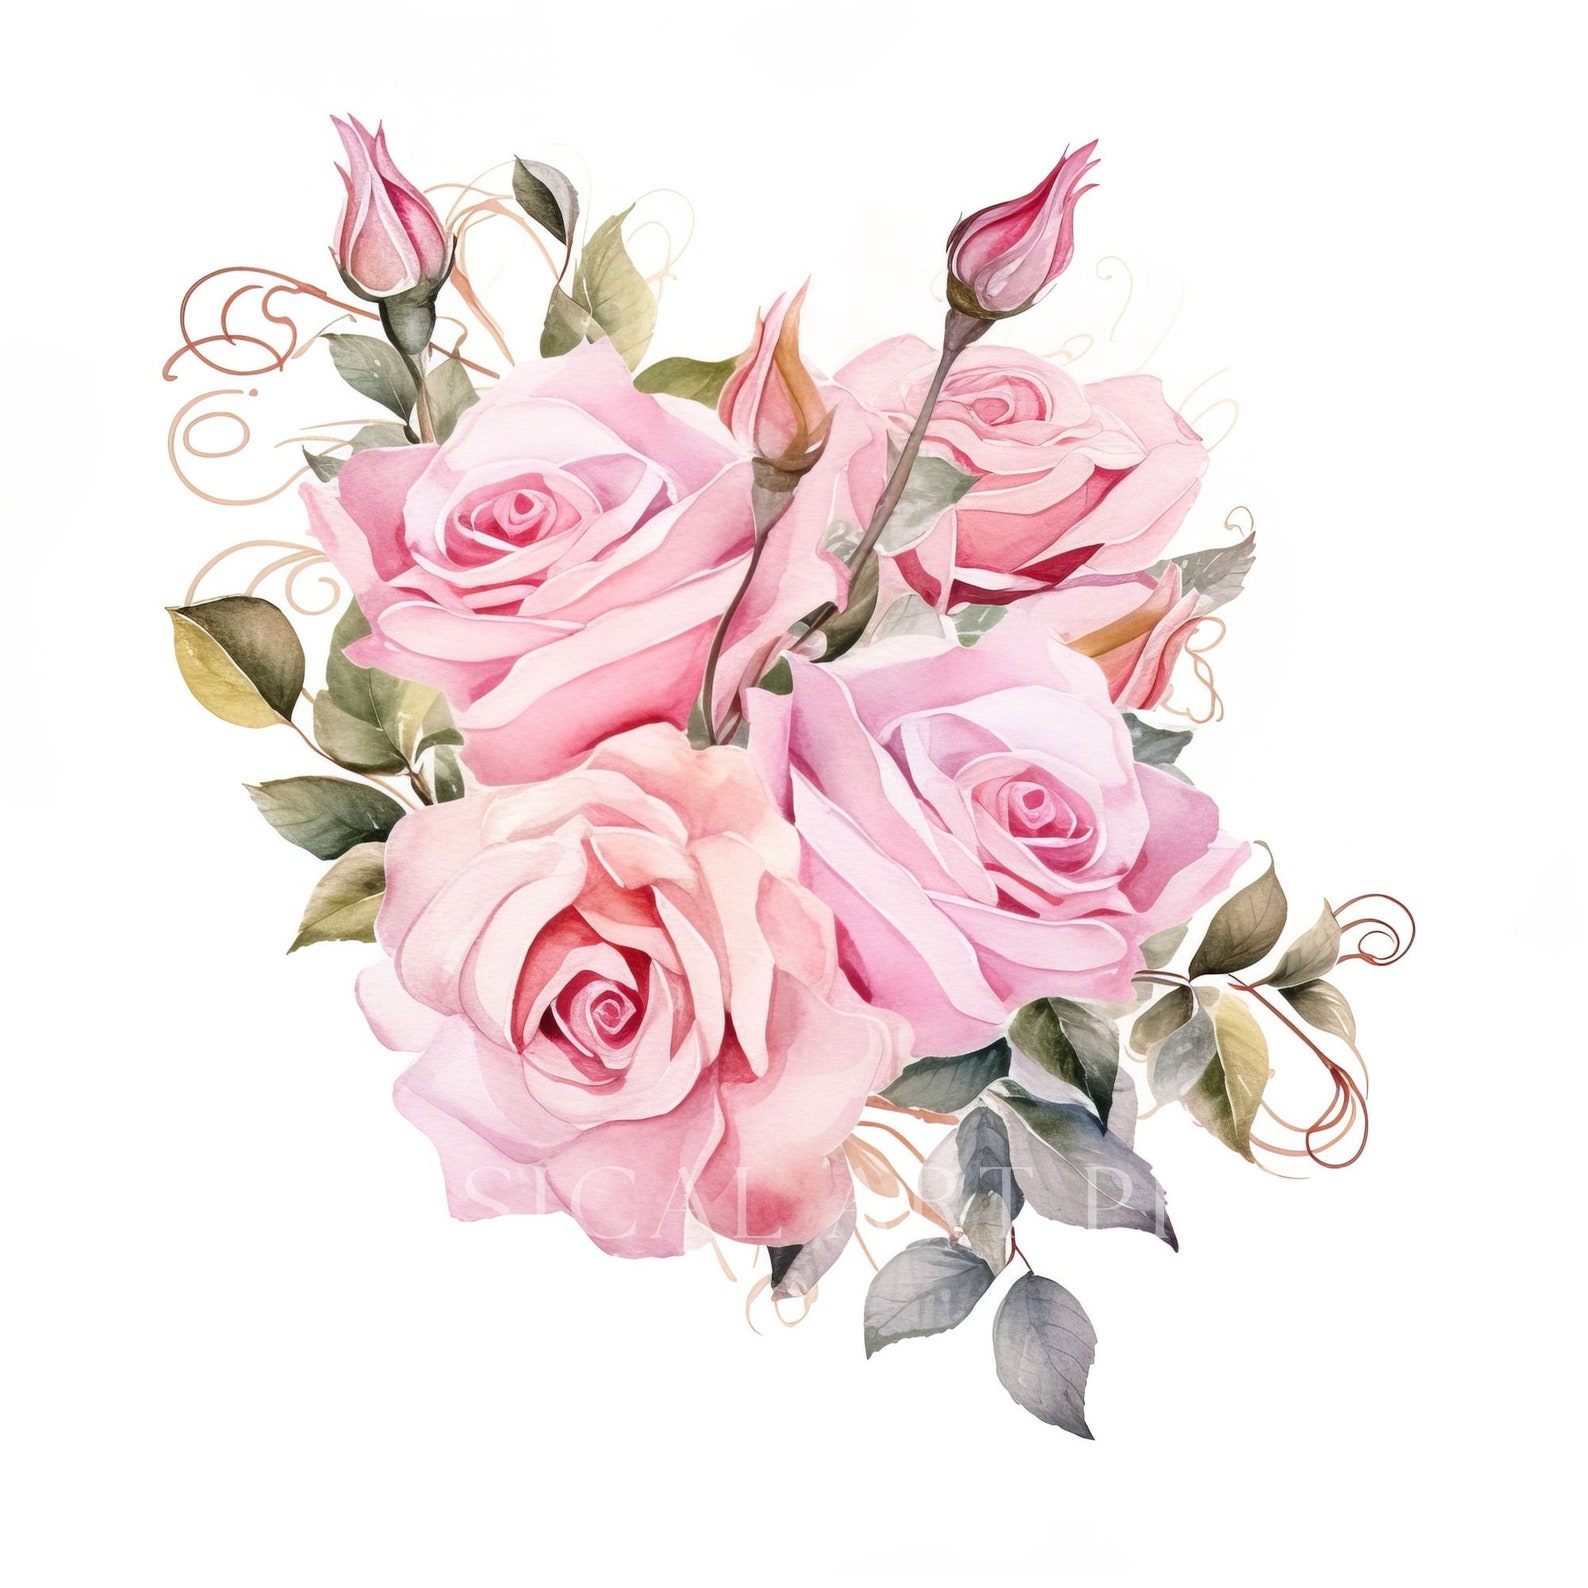 Pink Rose Clipart, Bouquet Clipart, Watercolor Flowers, Pink Roses ...